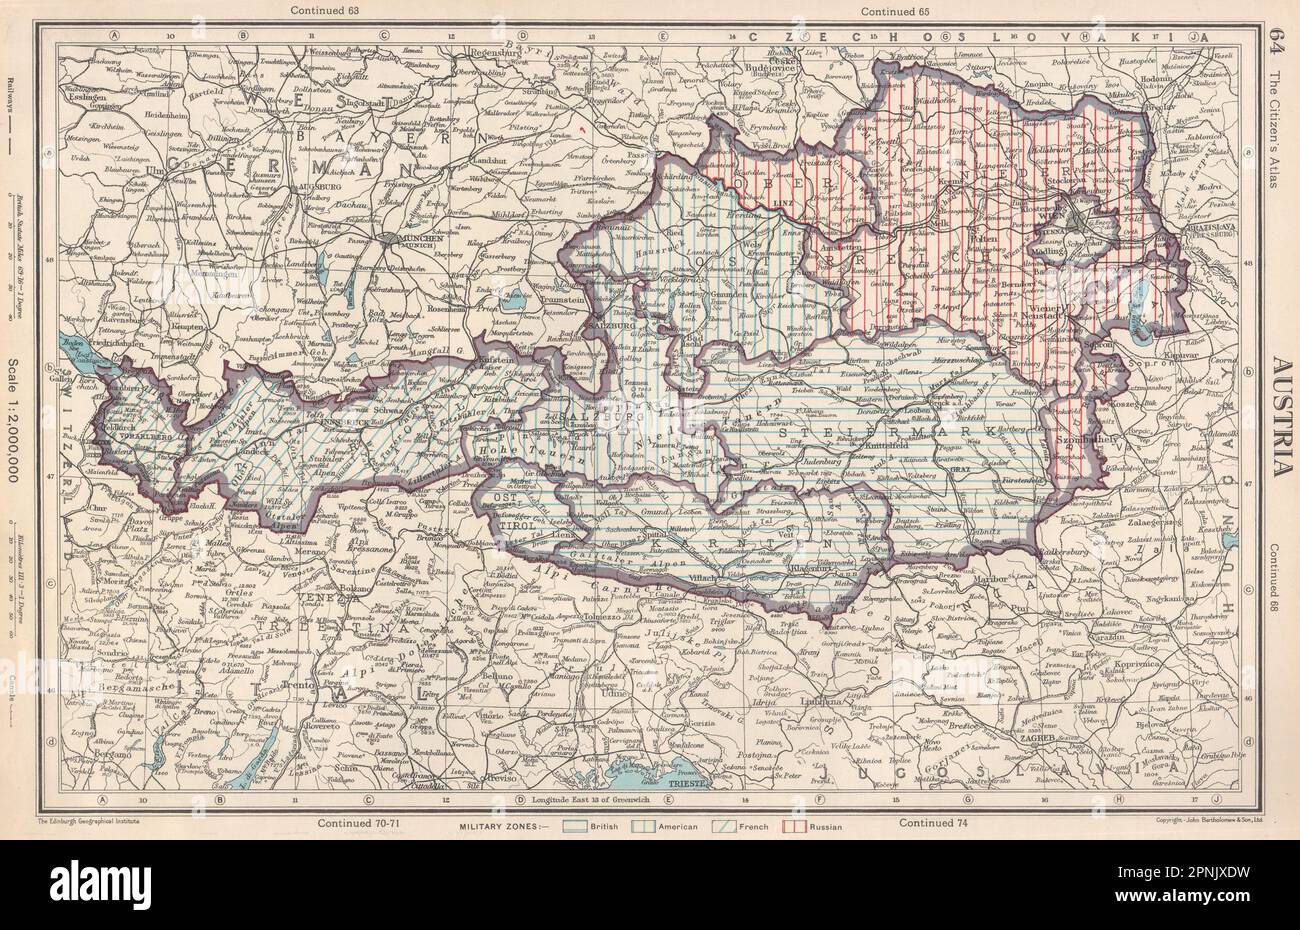 AUSTRIA. showing post WW2 military zones. British US French Russian 1952 map Stock Photo